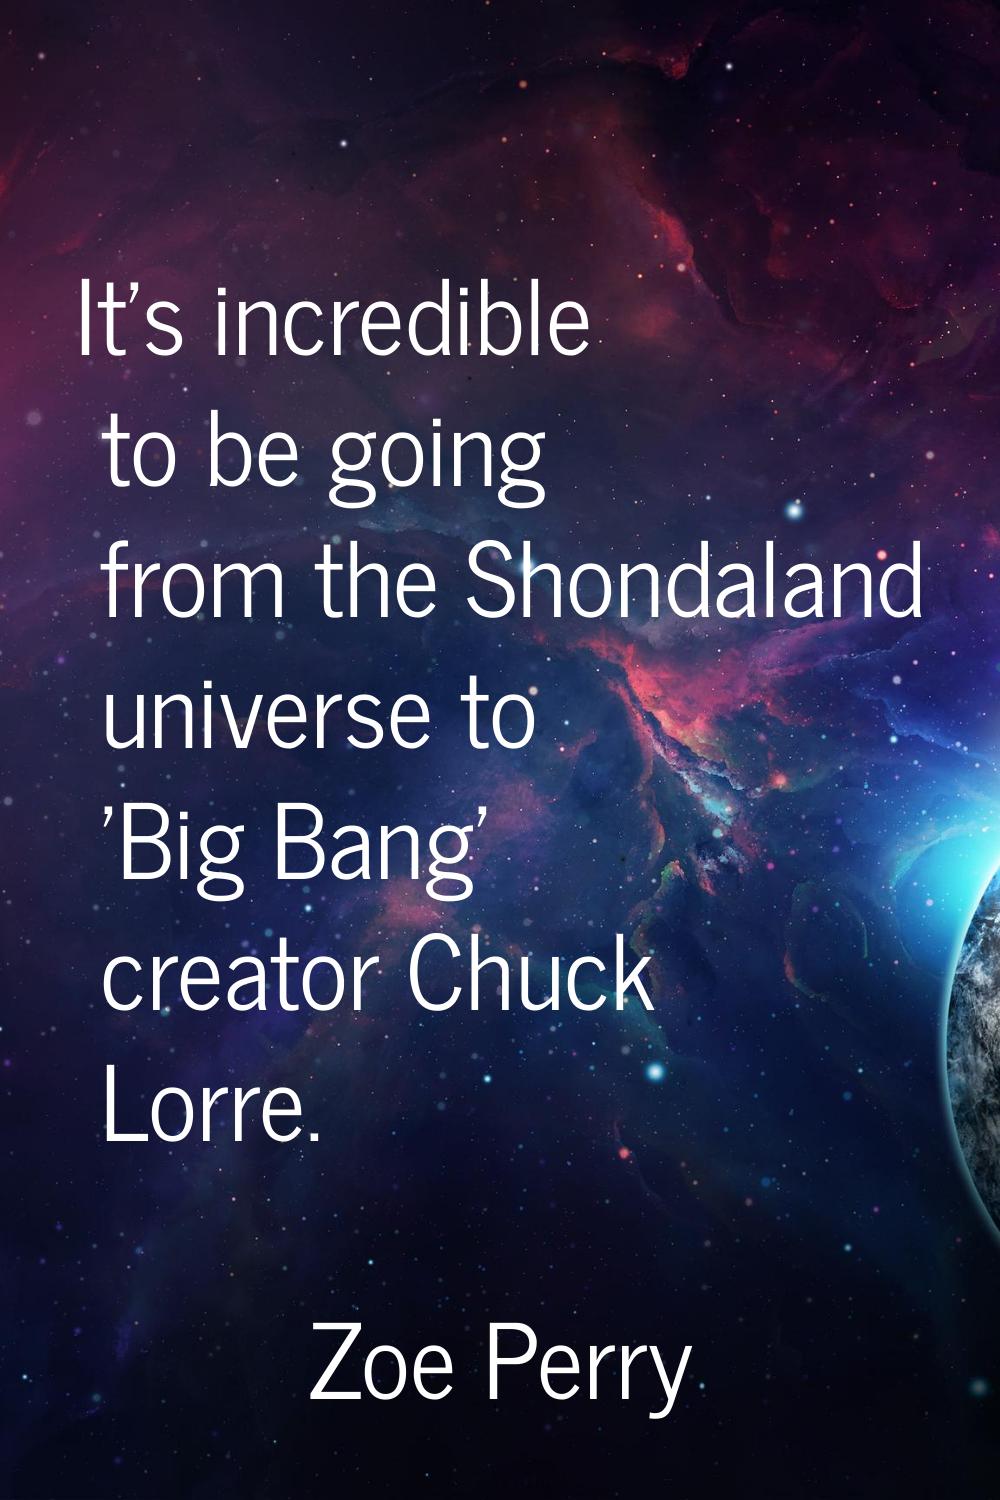 It's incredible to be going from the Shondaland universe to 'Big Bang' creator Chuck Lorre.